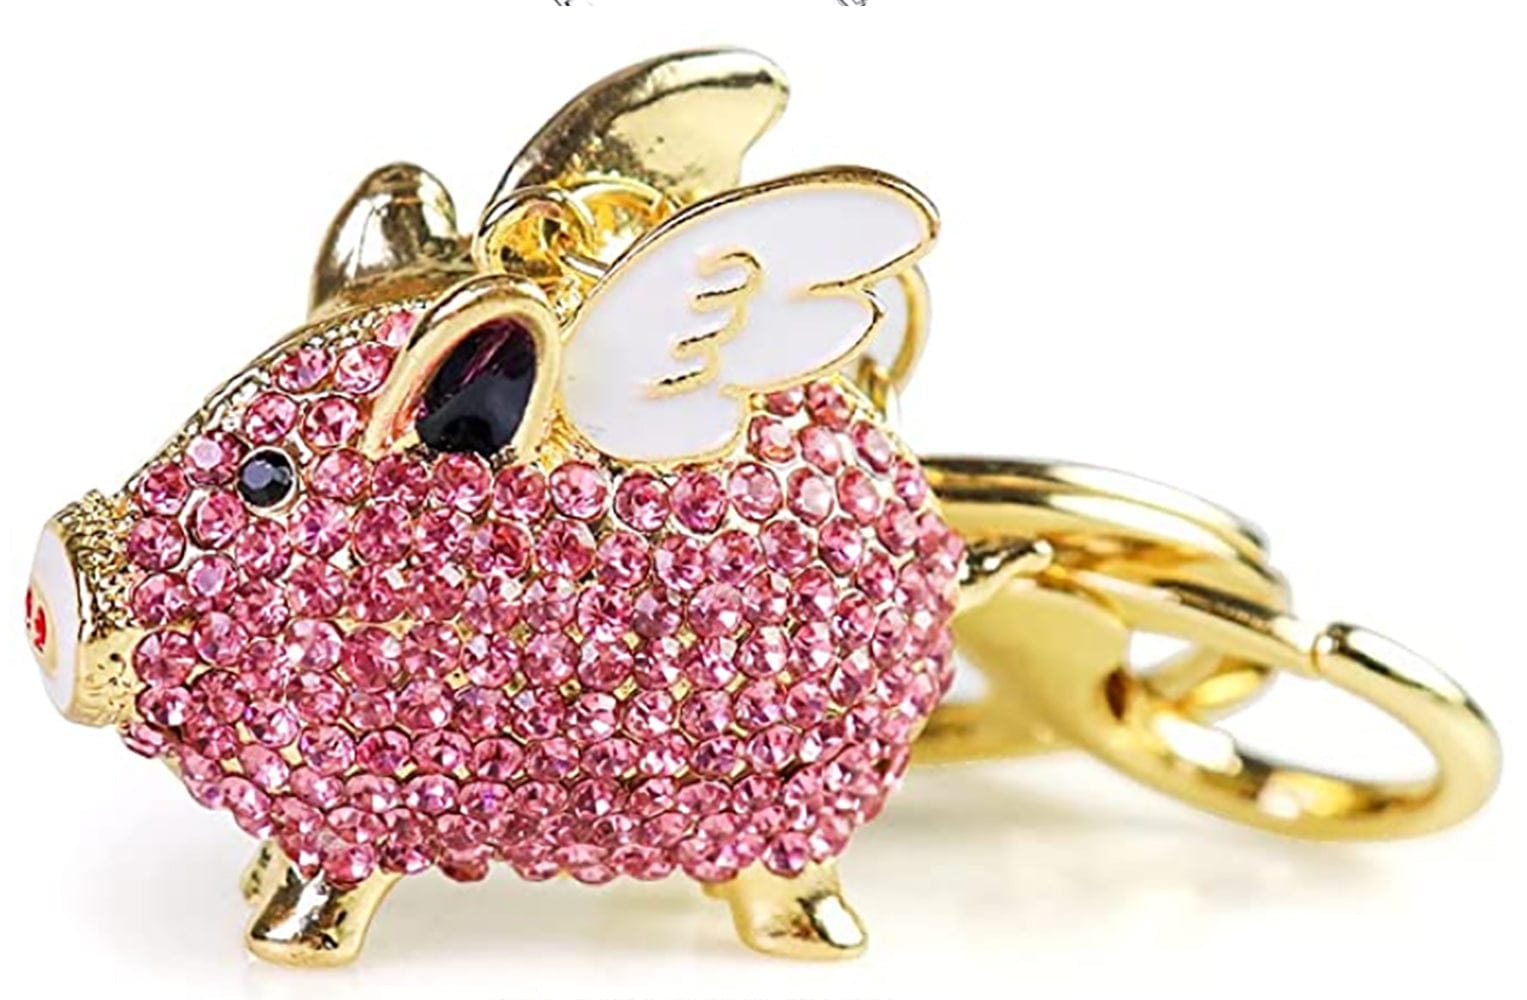 Pink Flying Pig Sparkling Angelic Piggy Gold Finish Keychain